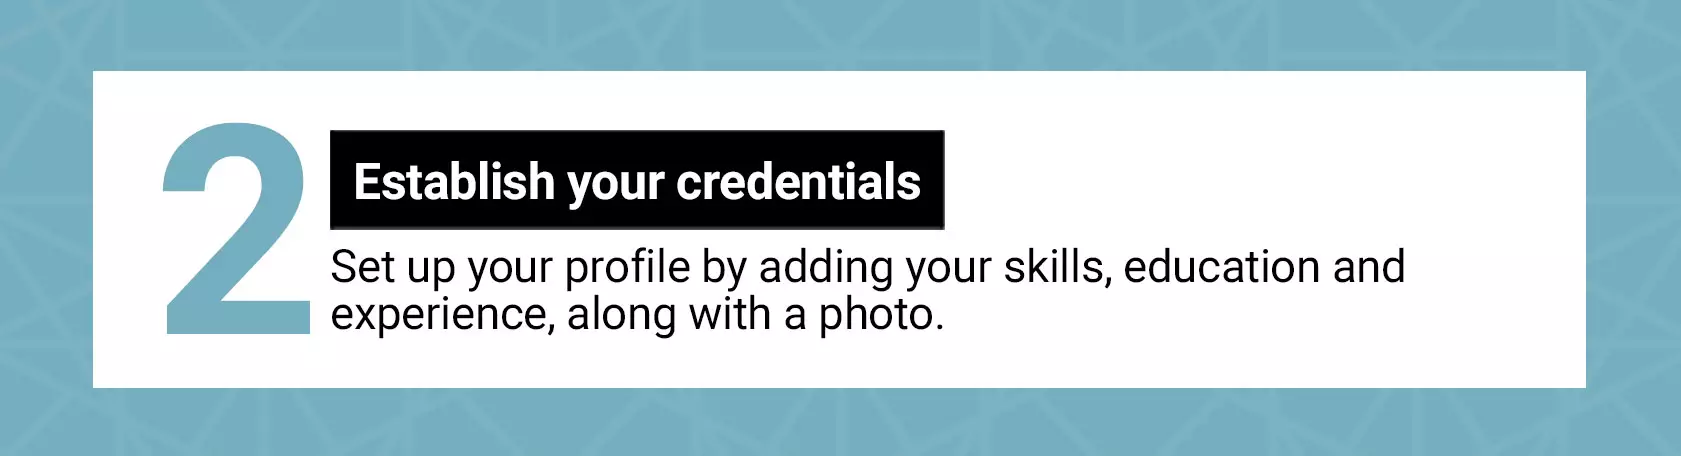 2 Establish your credentials. Set up your profile by adding your skills, education and experience, along with a photo